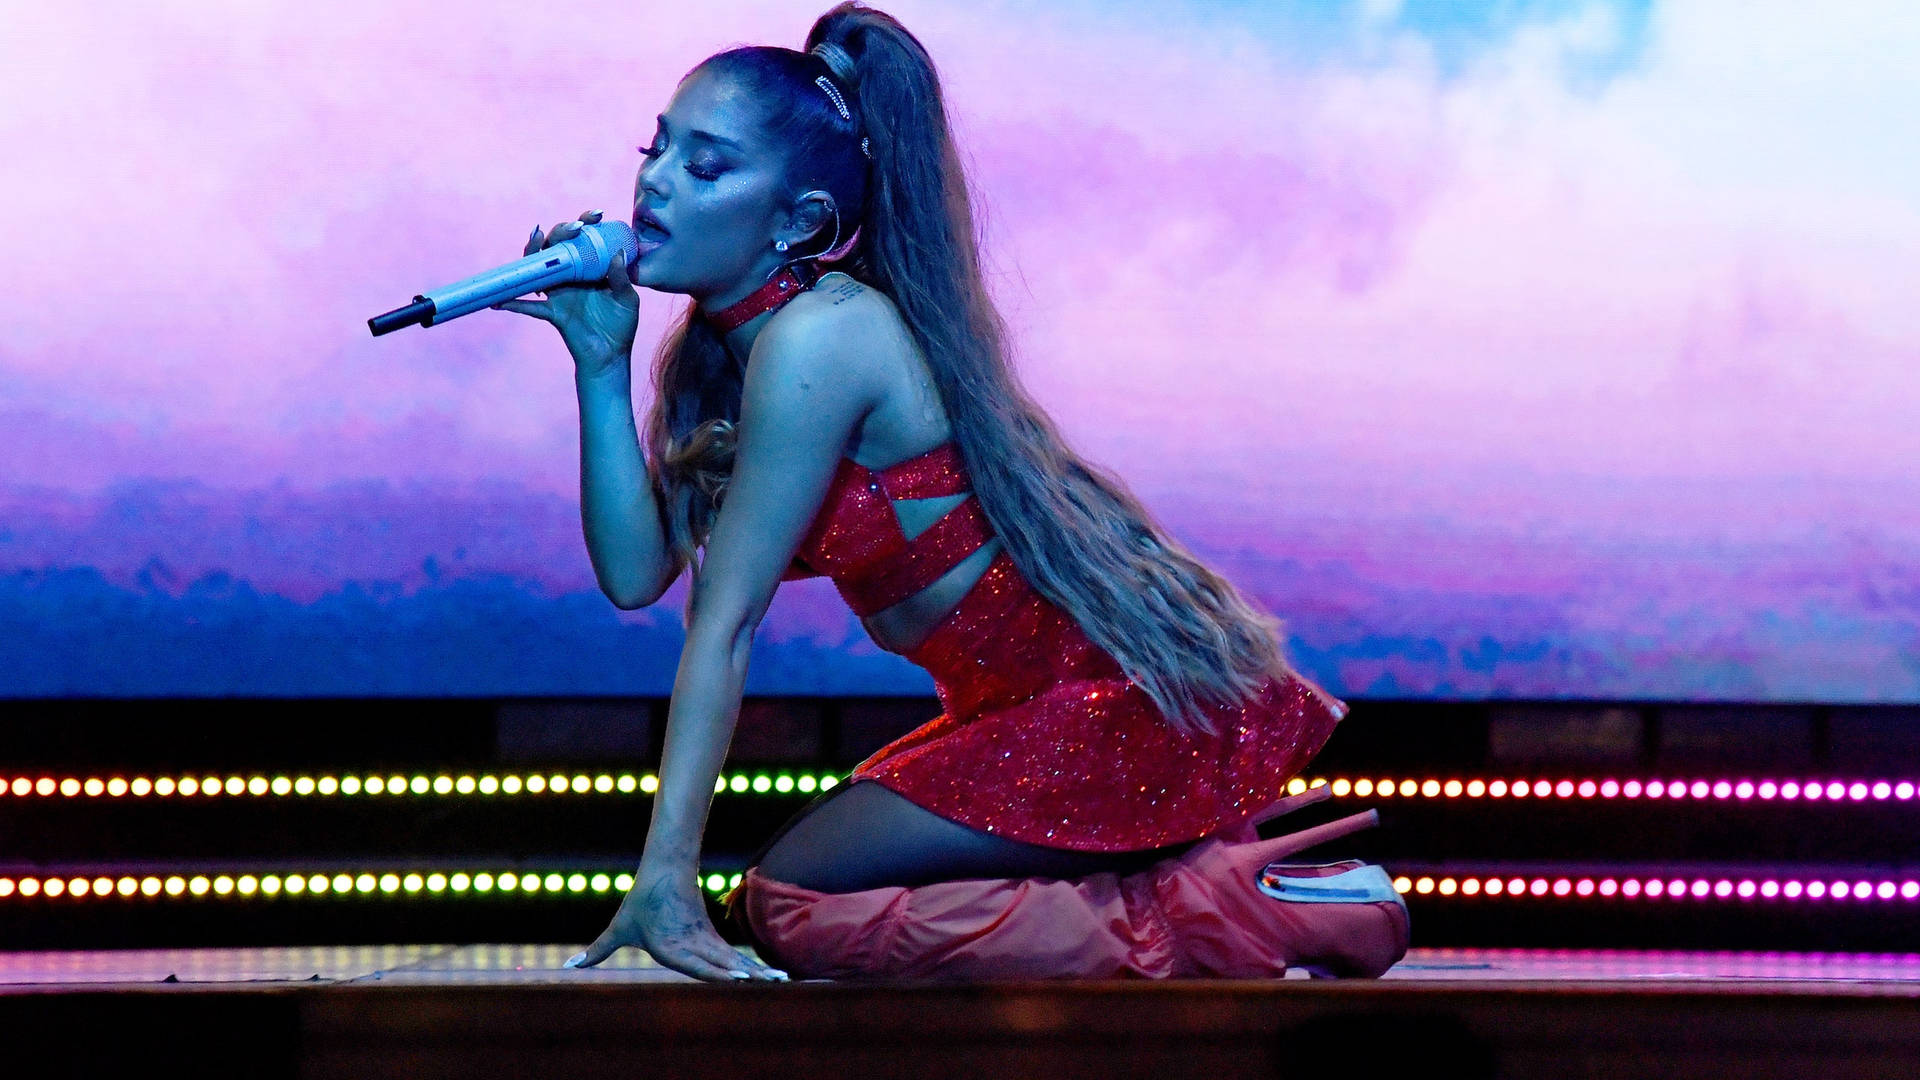 Ariana Grande Performing At Lollapalooza. Background